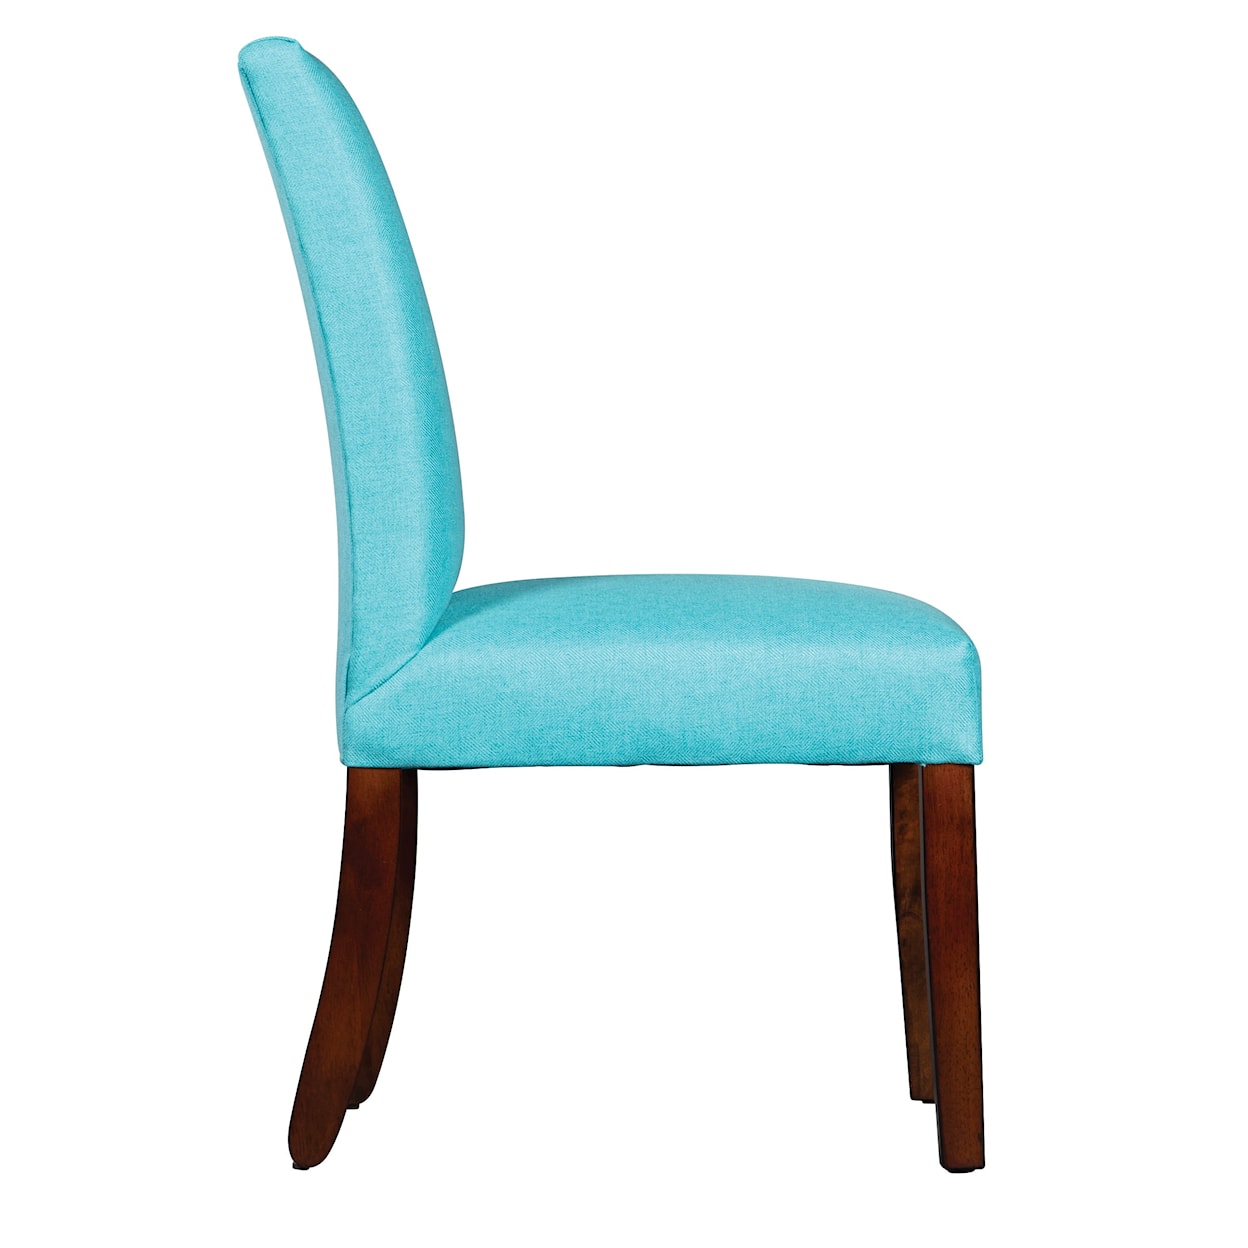 Hekman Upholstery Joanna Dining Chair with Flex Back